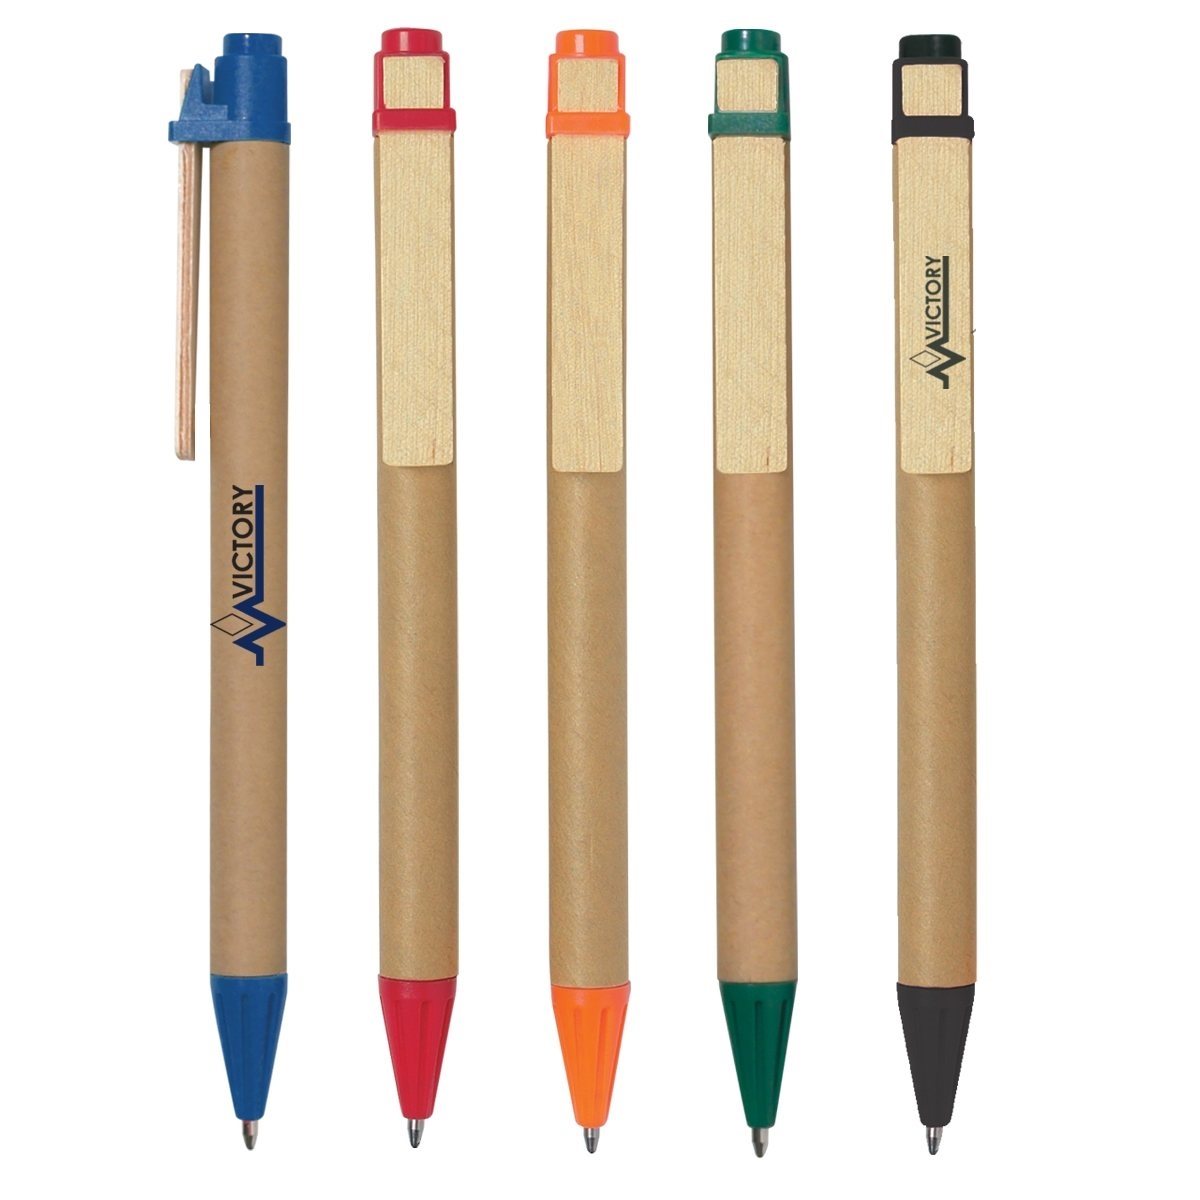 Do you offer eco-friendly or sustainable promotional pens?